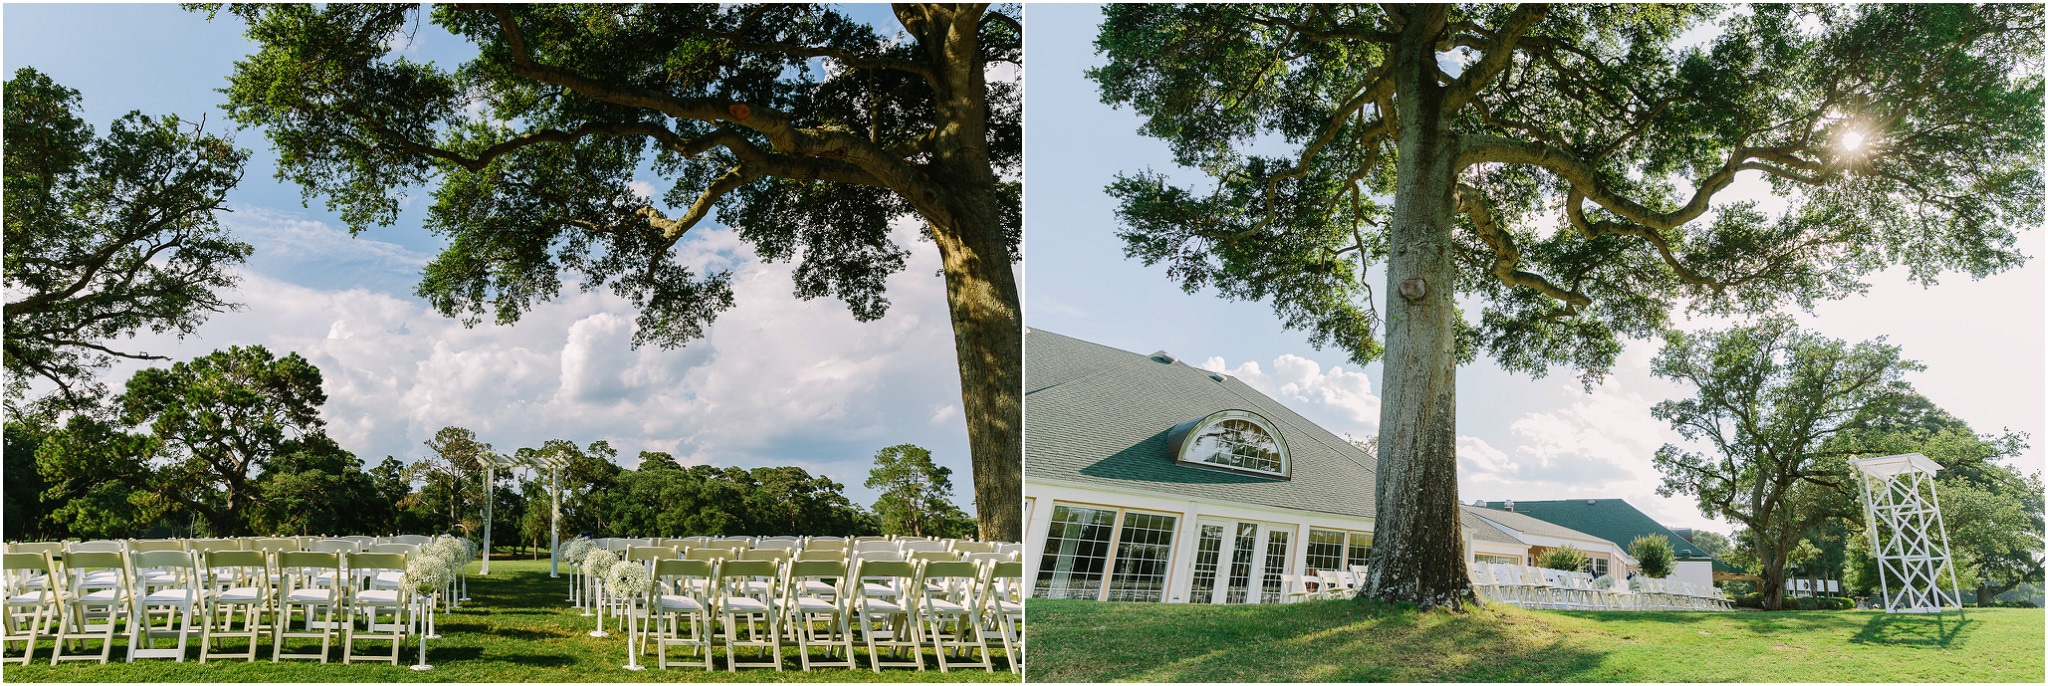 Ceremony set up at Surf Golf and Beach club under a beautiful tree and lightly cloudy sky